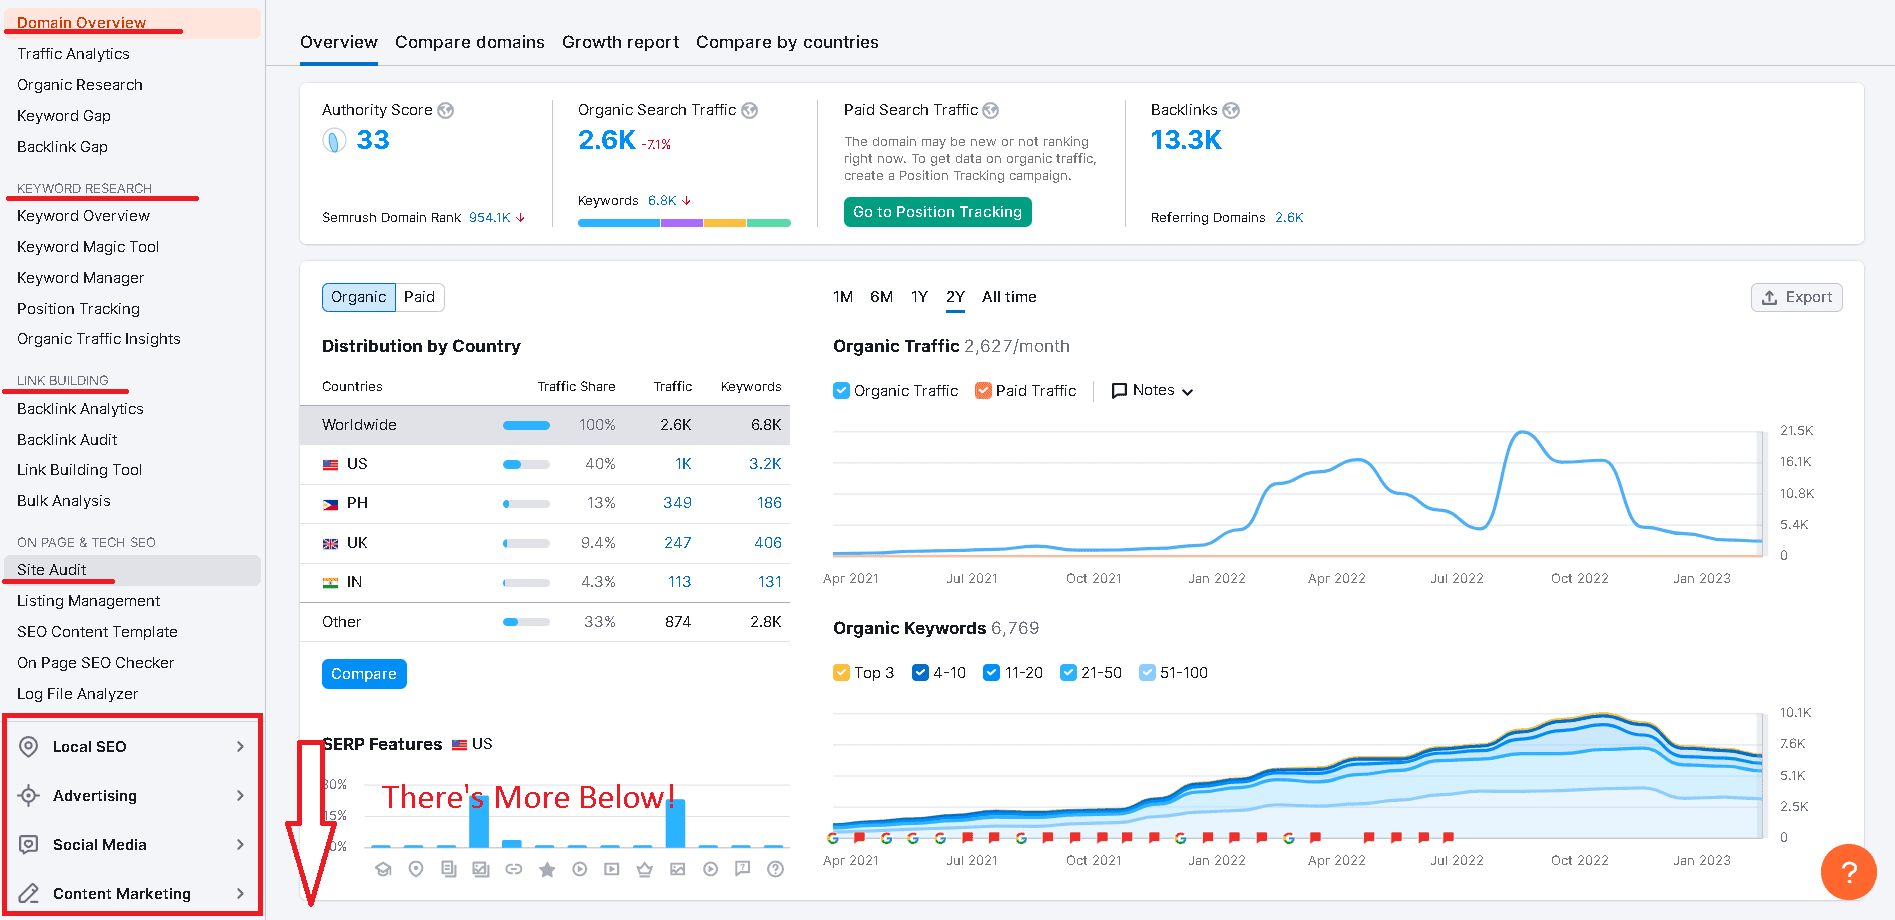 SEMrush cluttered interface and poor UX